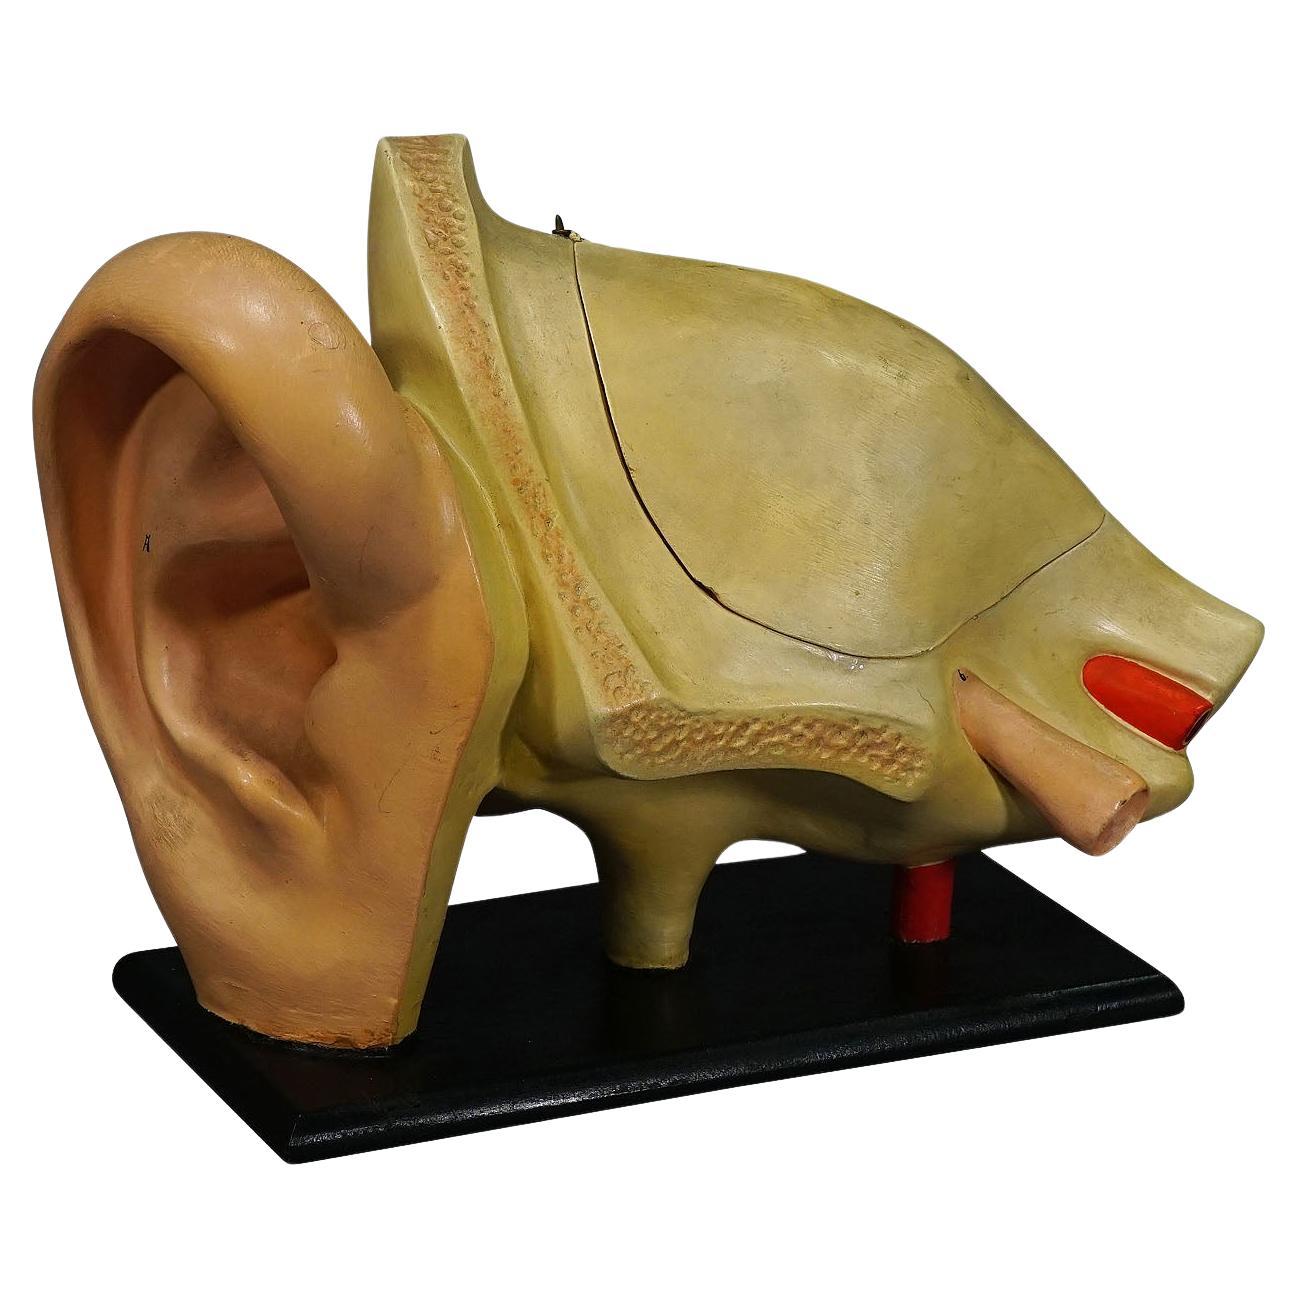 Antique Teaching Aid Modell of an Ear - Somso ca. 1900 For Sale